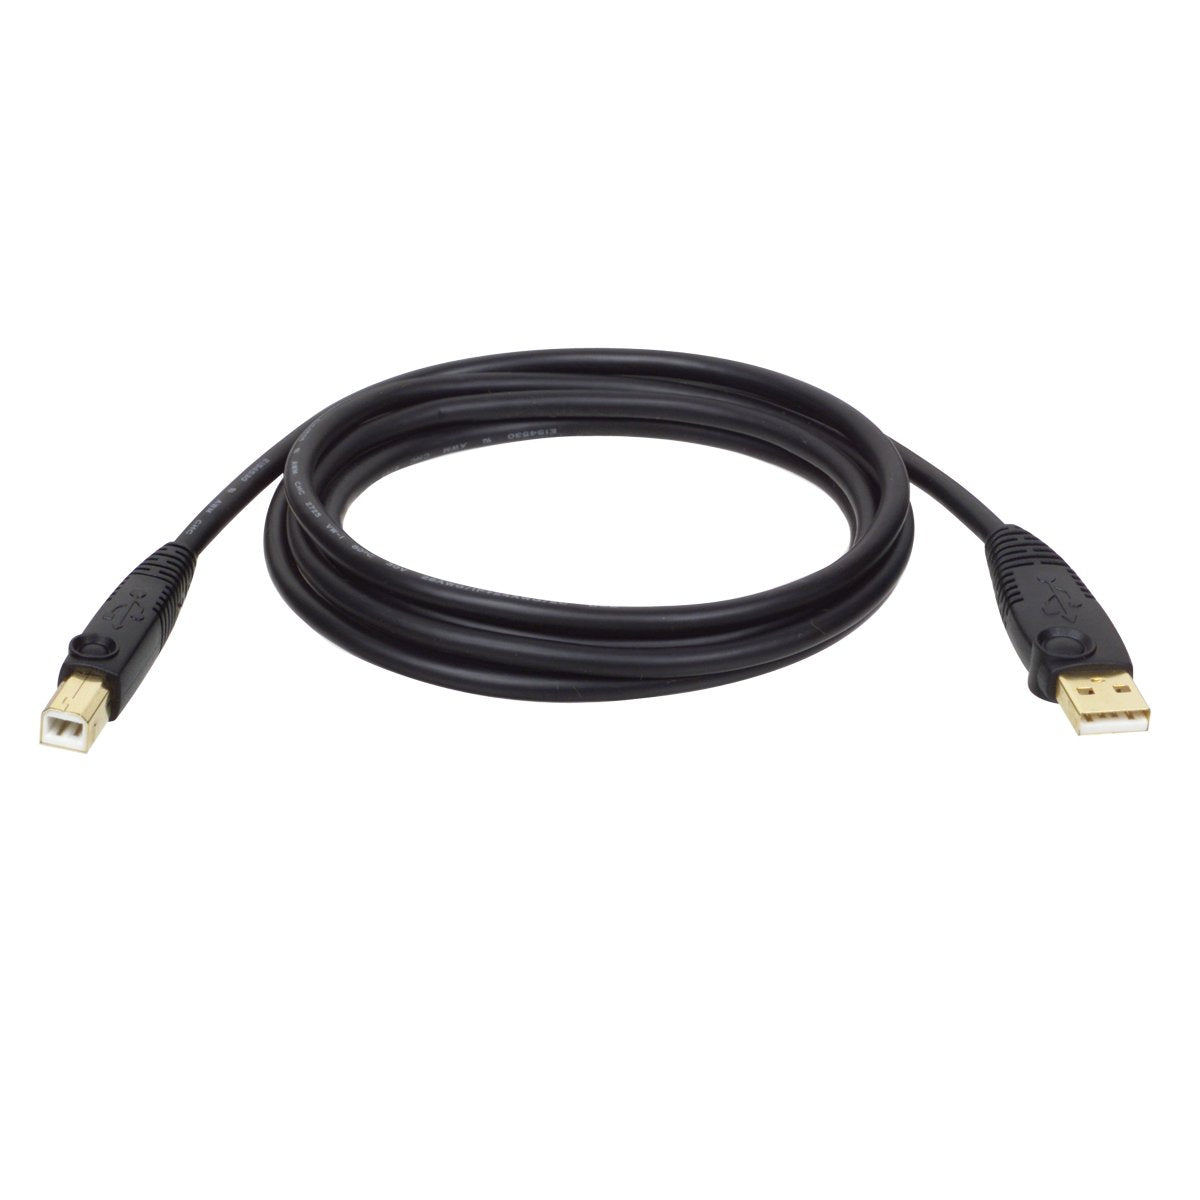 Tripp-Lite A-Male to B-Male USB 2.0 Cable (6ft)